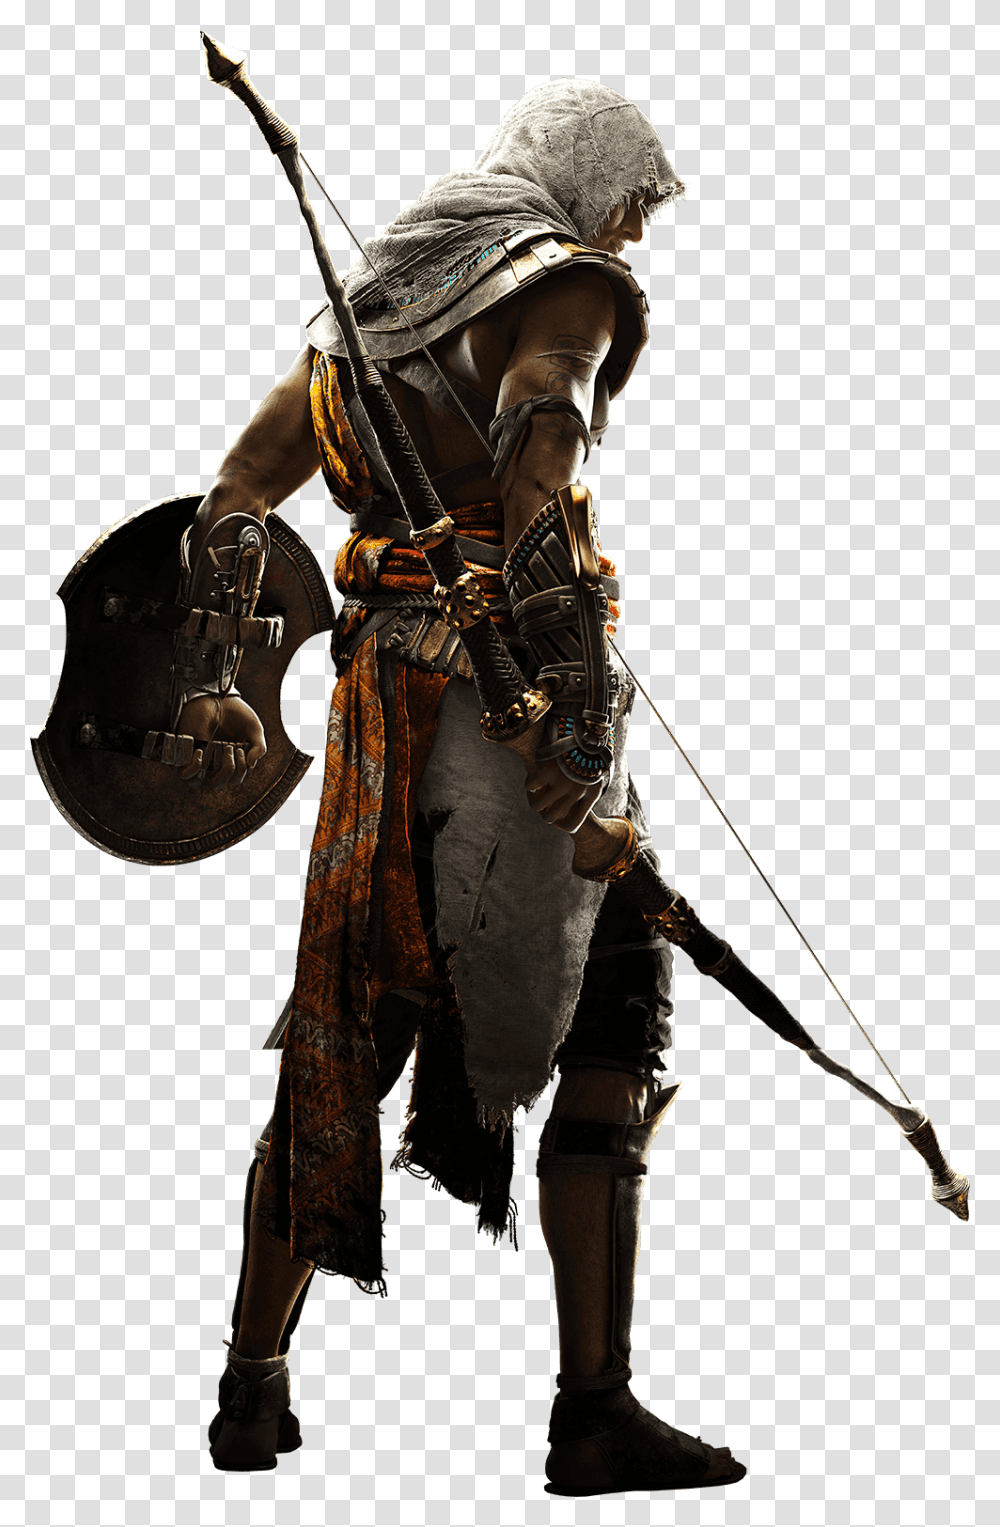 Assassinquots Creed Odyssey On Xbox One Pc Assassins Creed Origins, Person, Human, Armor, People Transparent Png